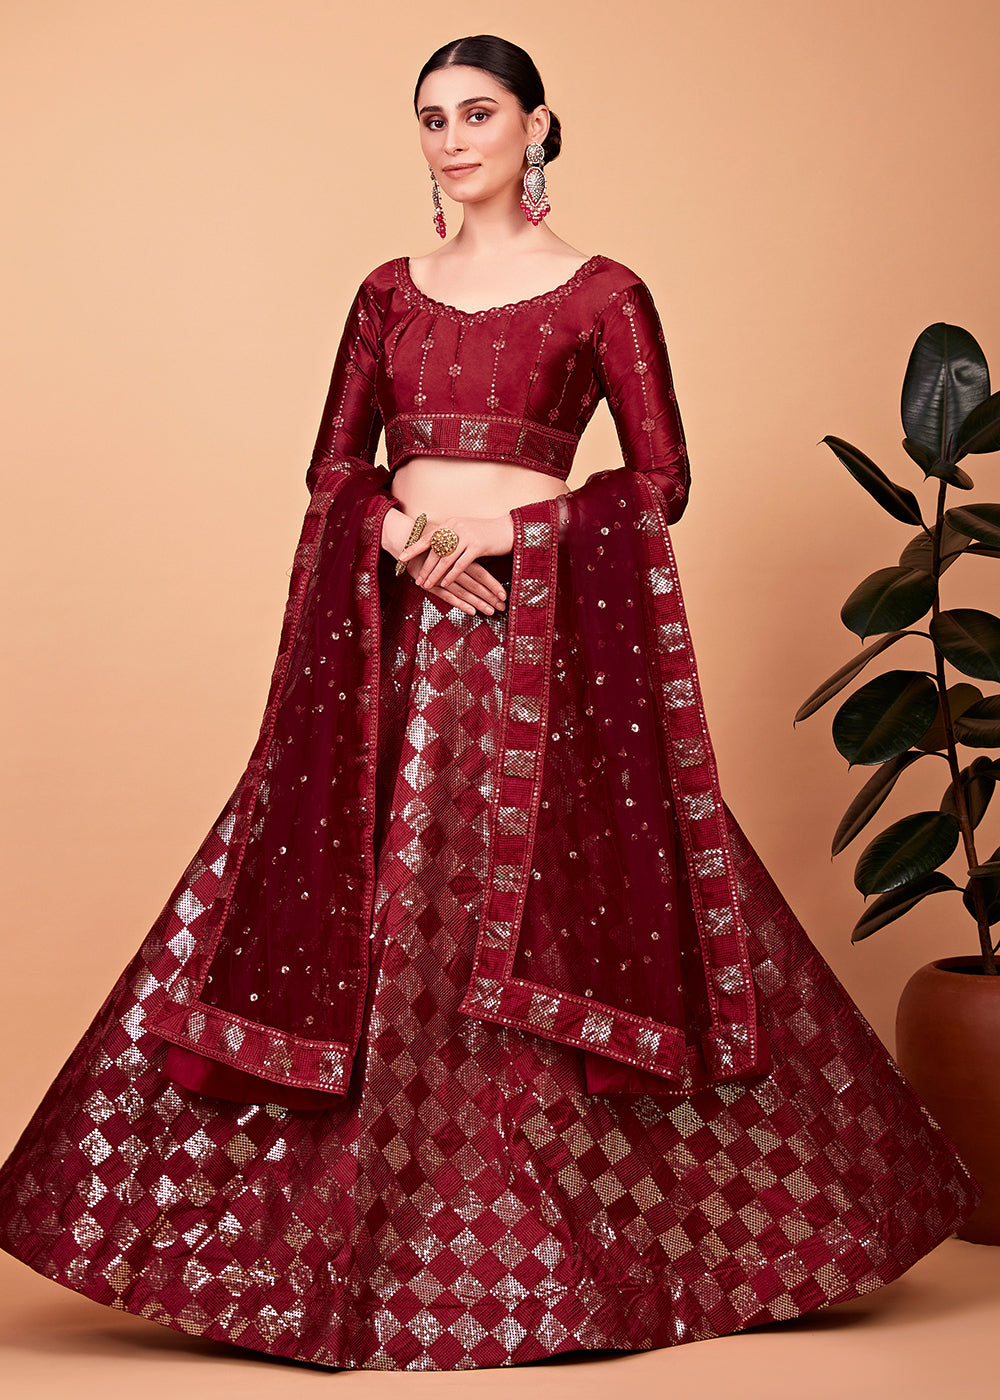 Buy Now Sensational Red Multi Thread & Sequins Cocktail Party Lehenga Choli Online in USA, UK, Canada & Worldwide at Empress Clothing.